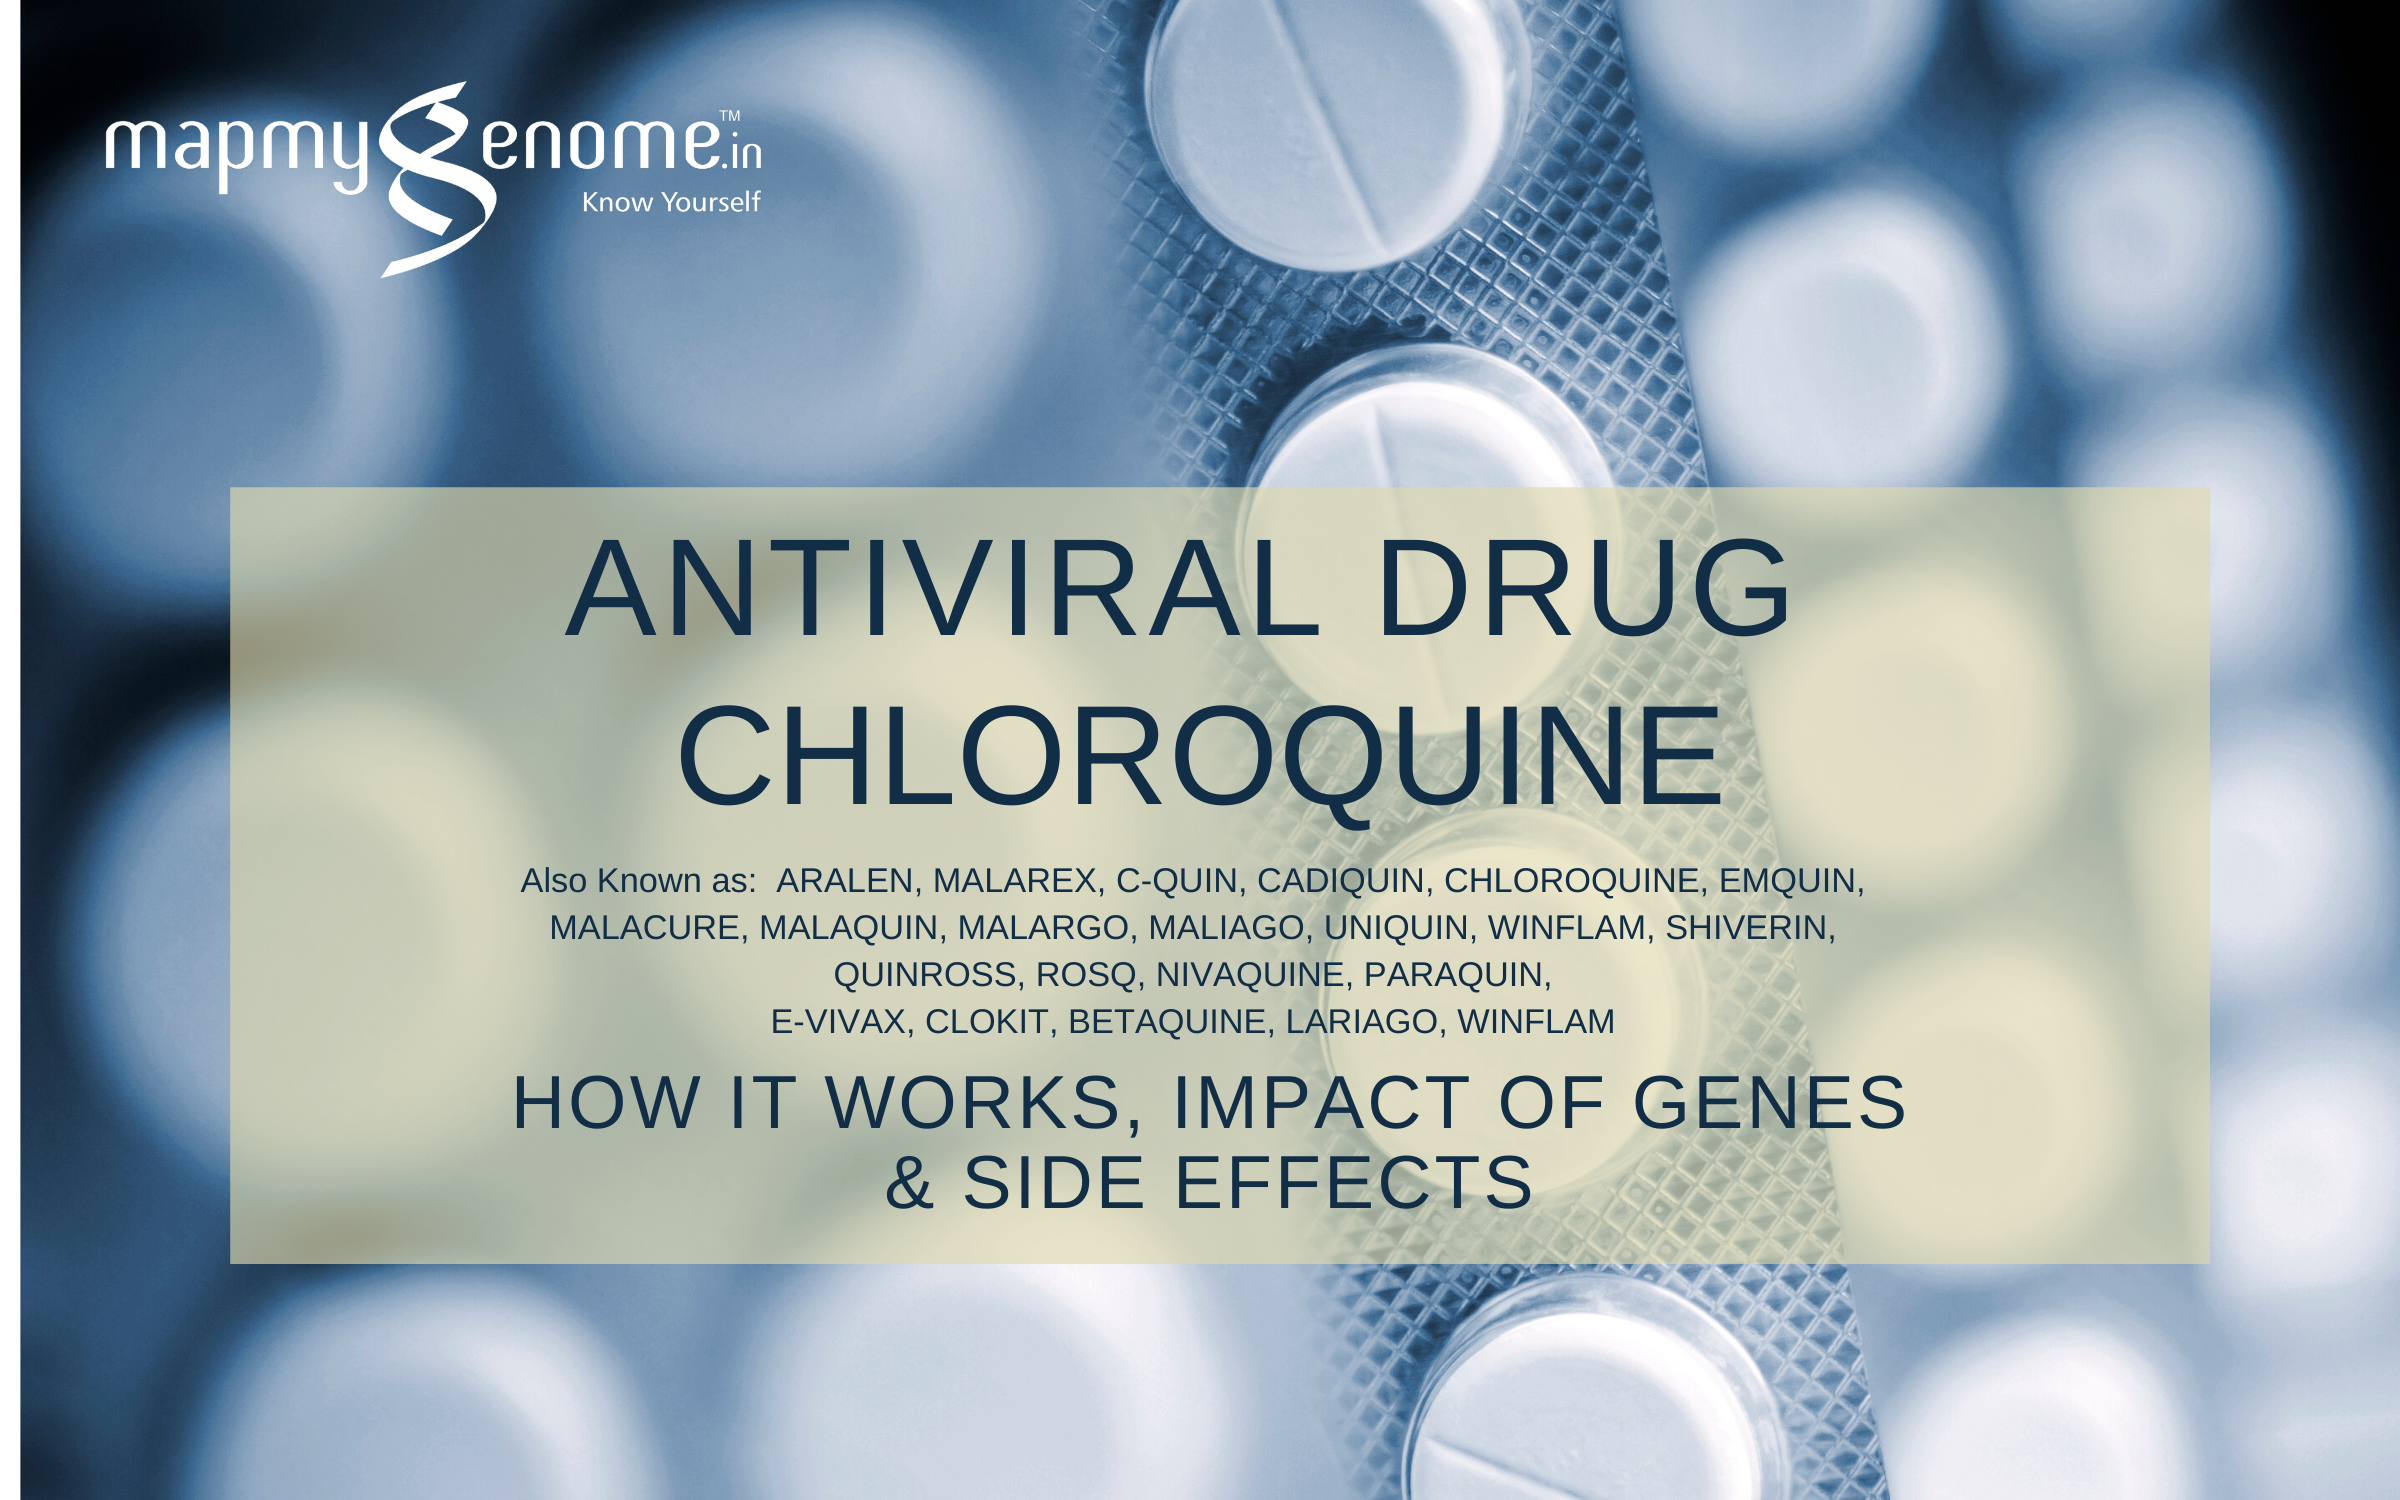 Antiviral drug – Chloroquine : How the drug works, Impact of genes & Possible side effects